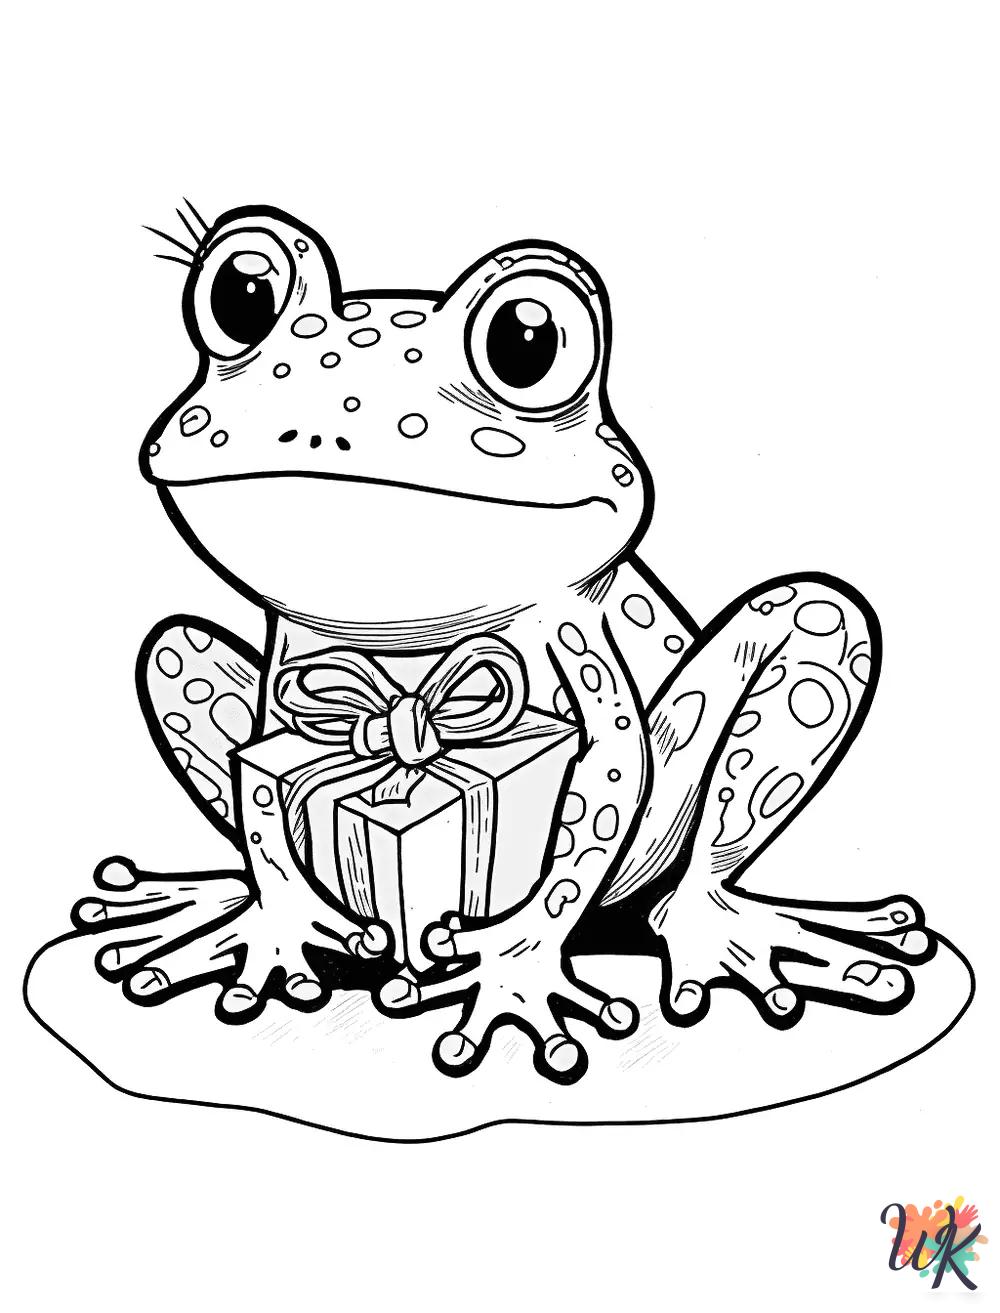 Frog coloring book pages